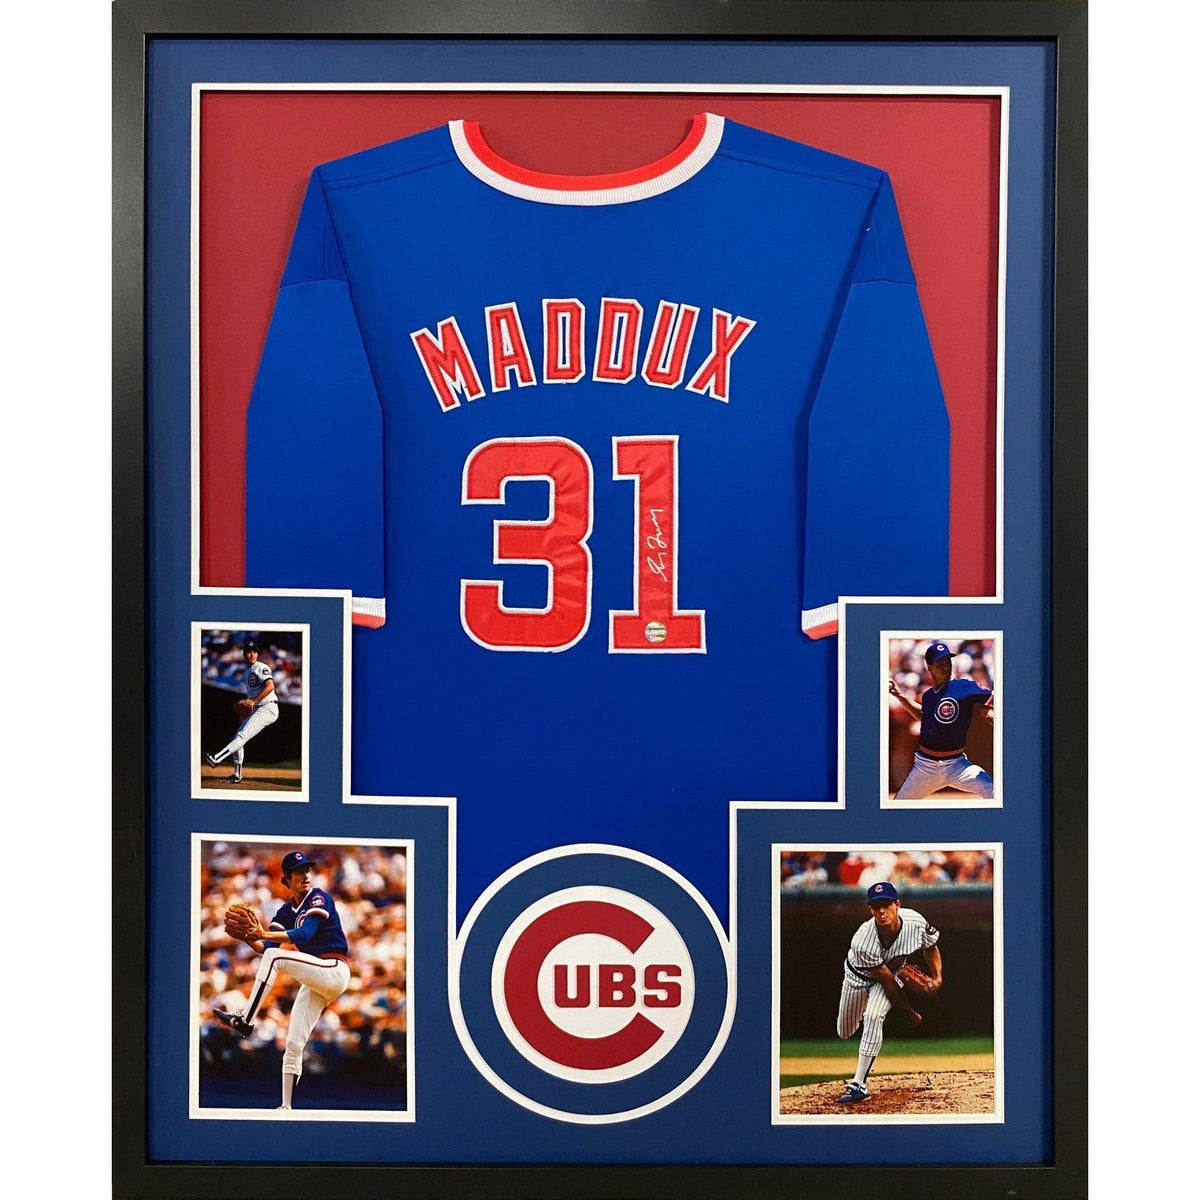 Greg Maddux Signed Autographed Chicago Cubs Baseball Jersey